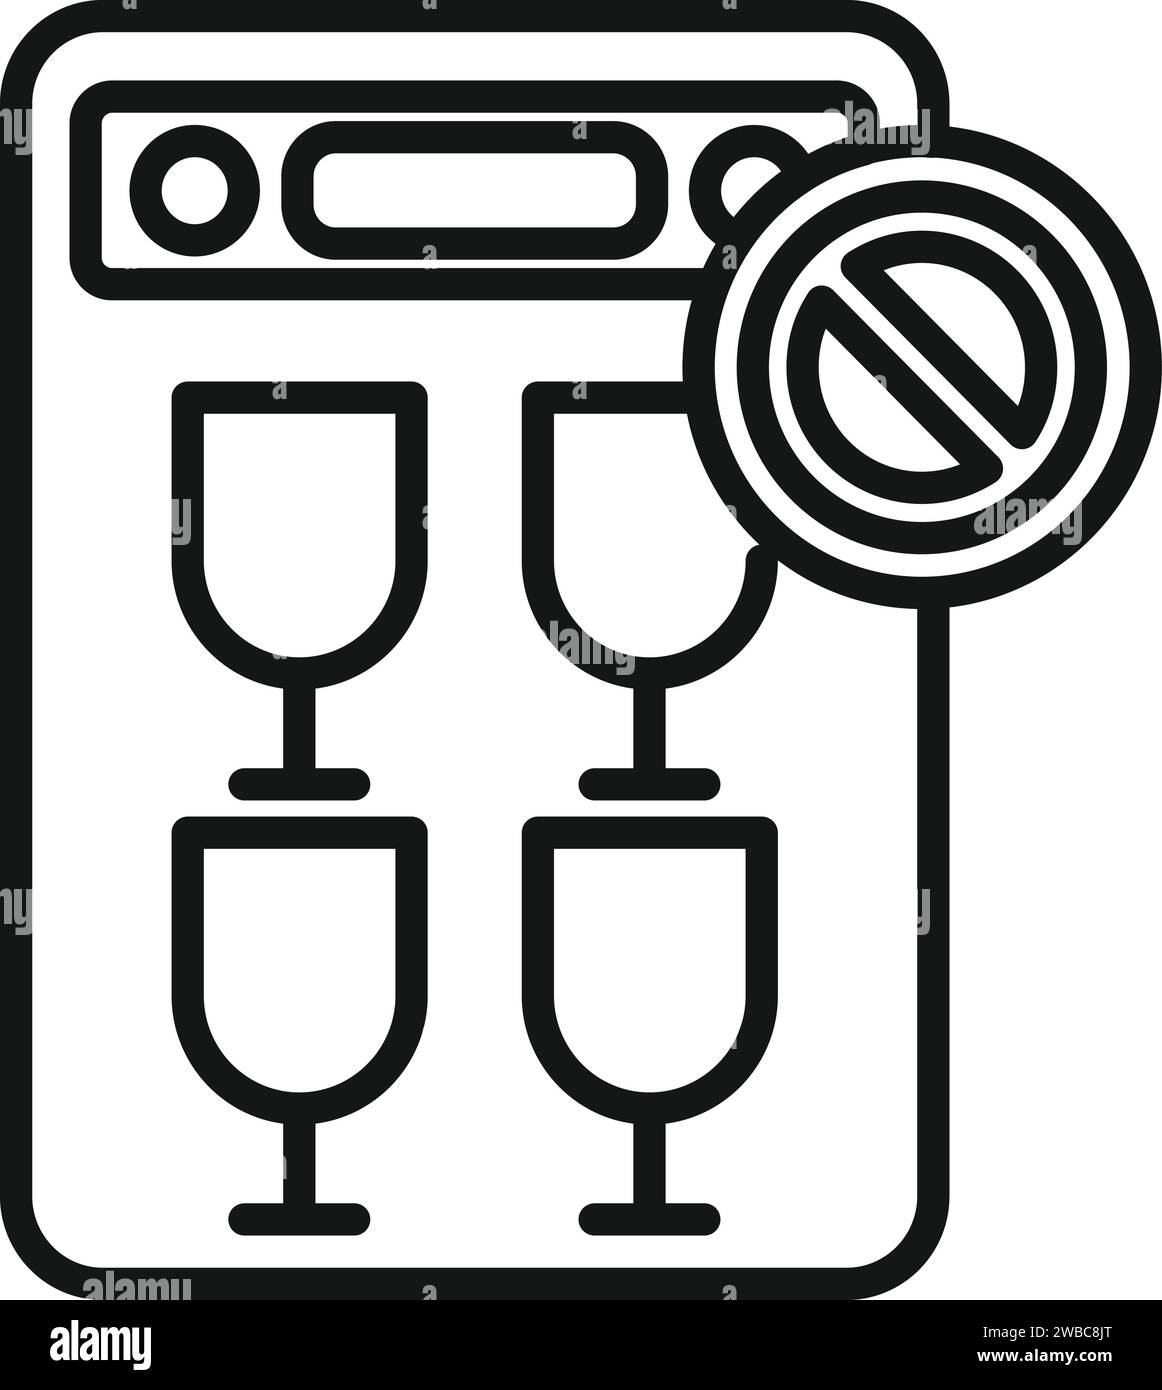 No work dishwasher icon outline vector. Service heater. Dish home ac engineer Stock Vector